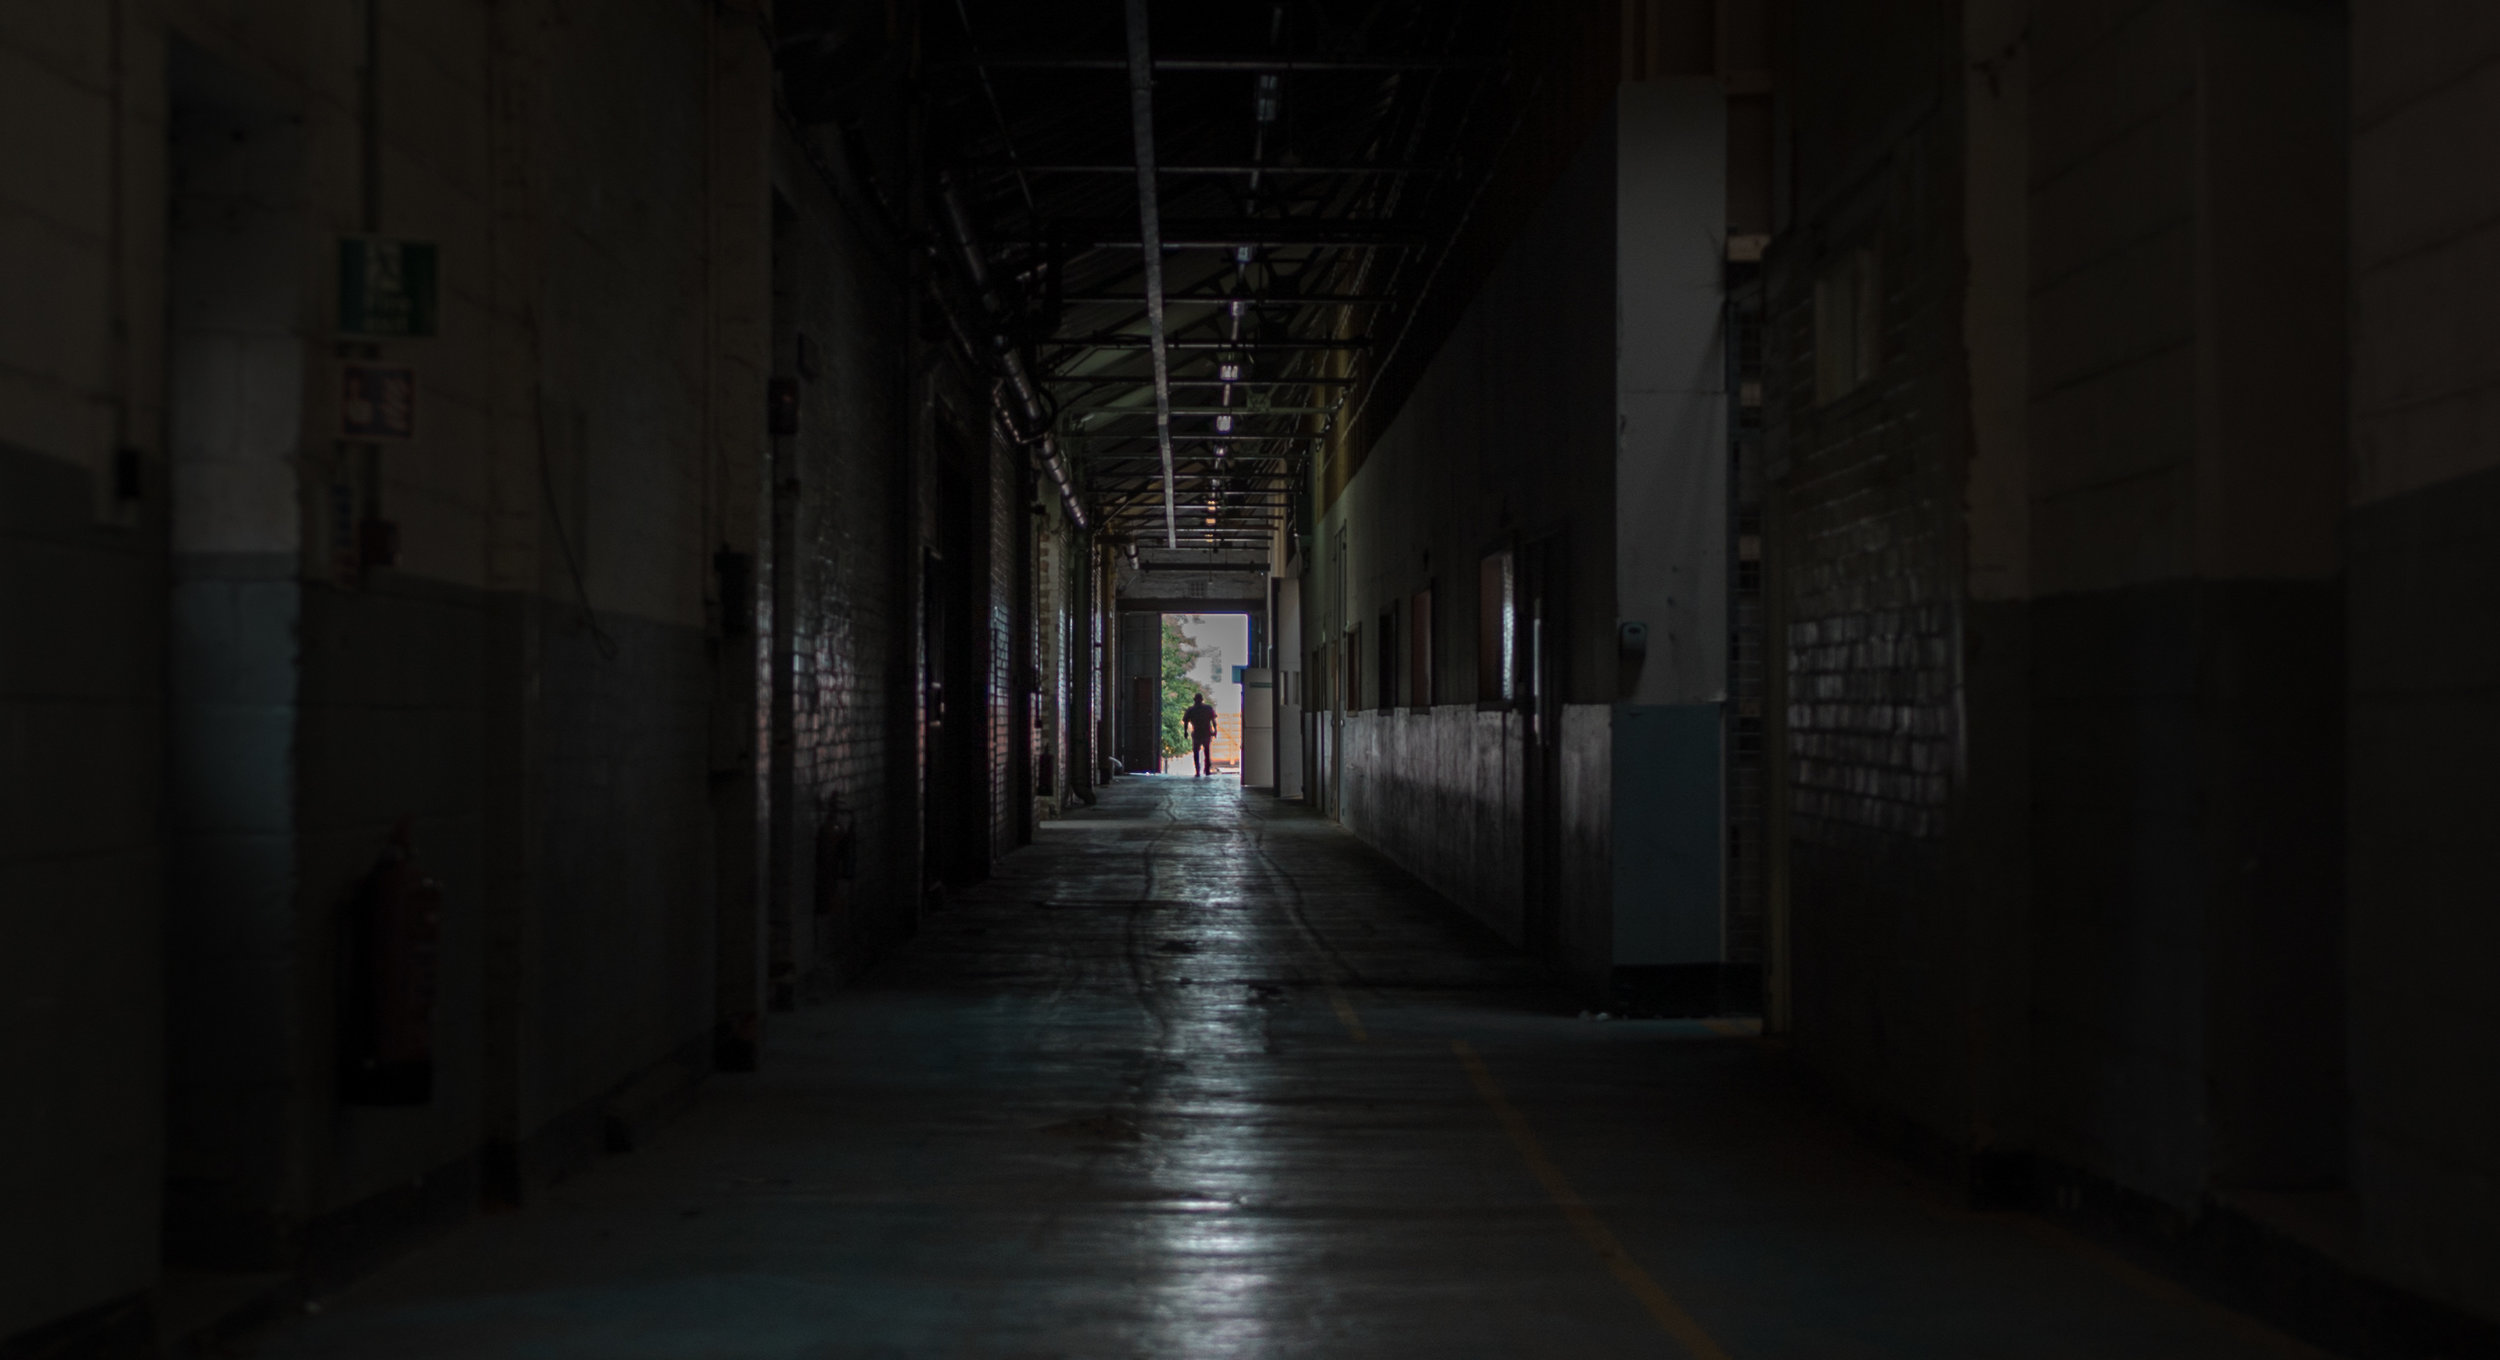  Sony A7s - paint factory,  LONDON   